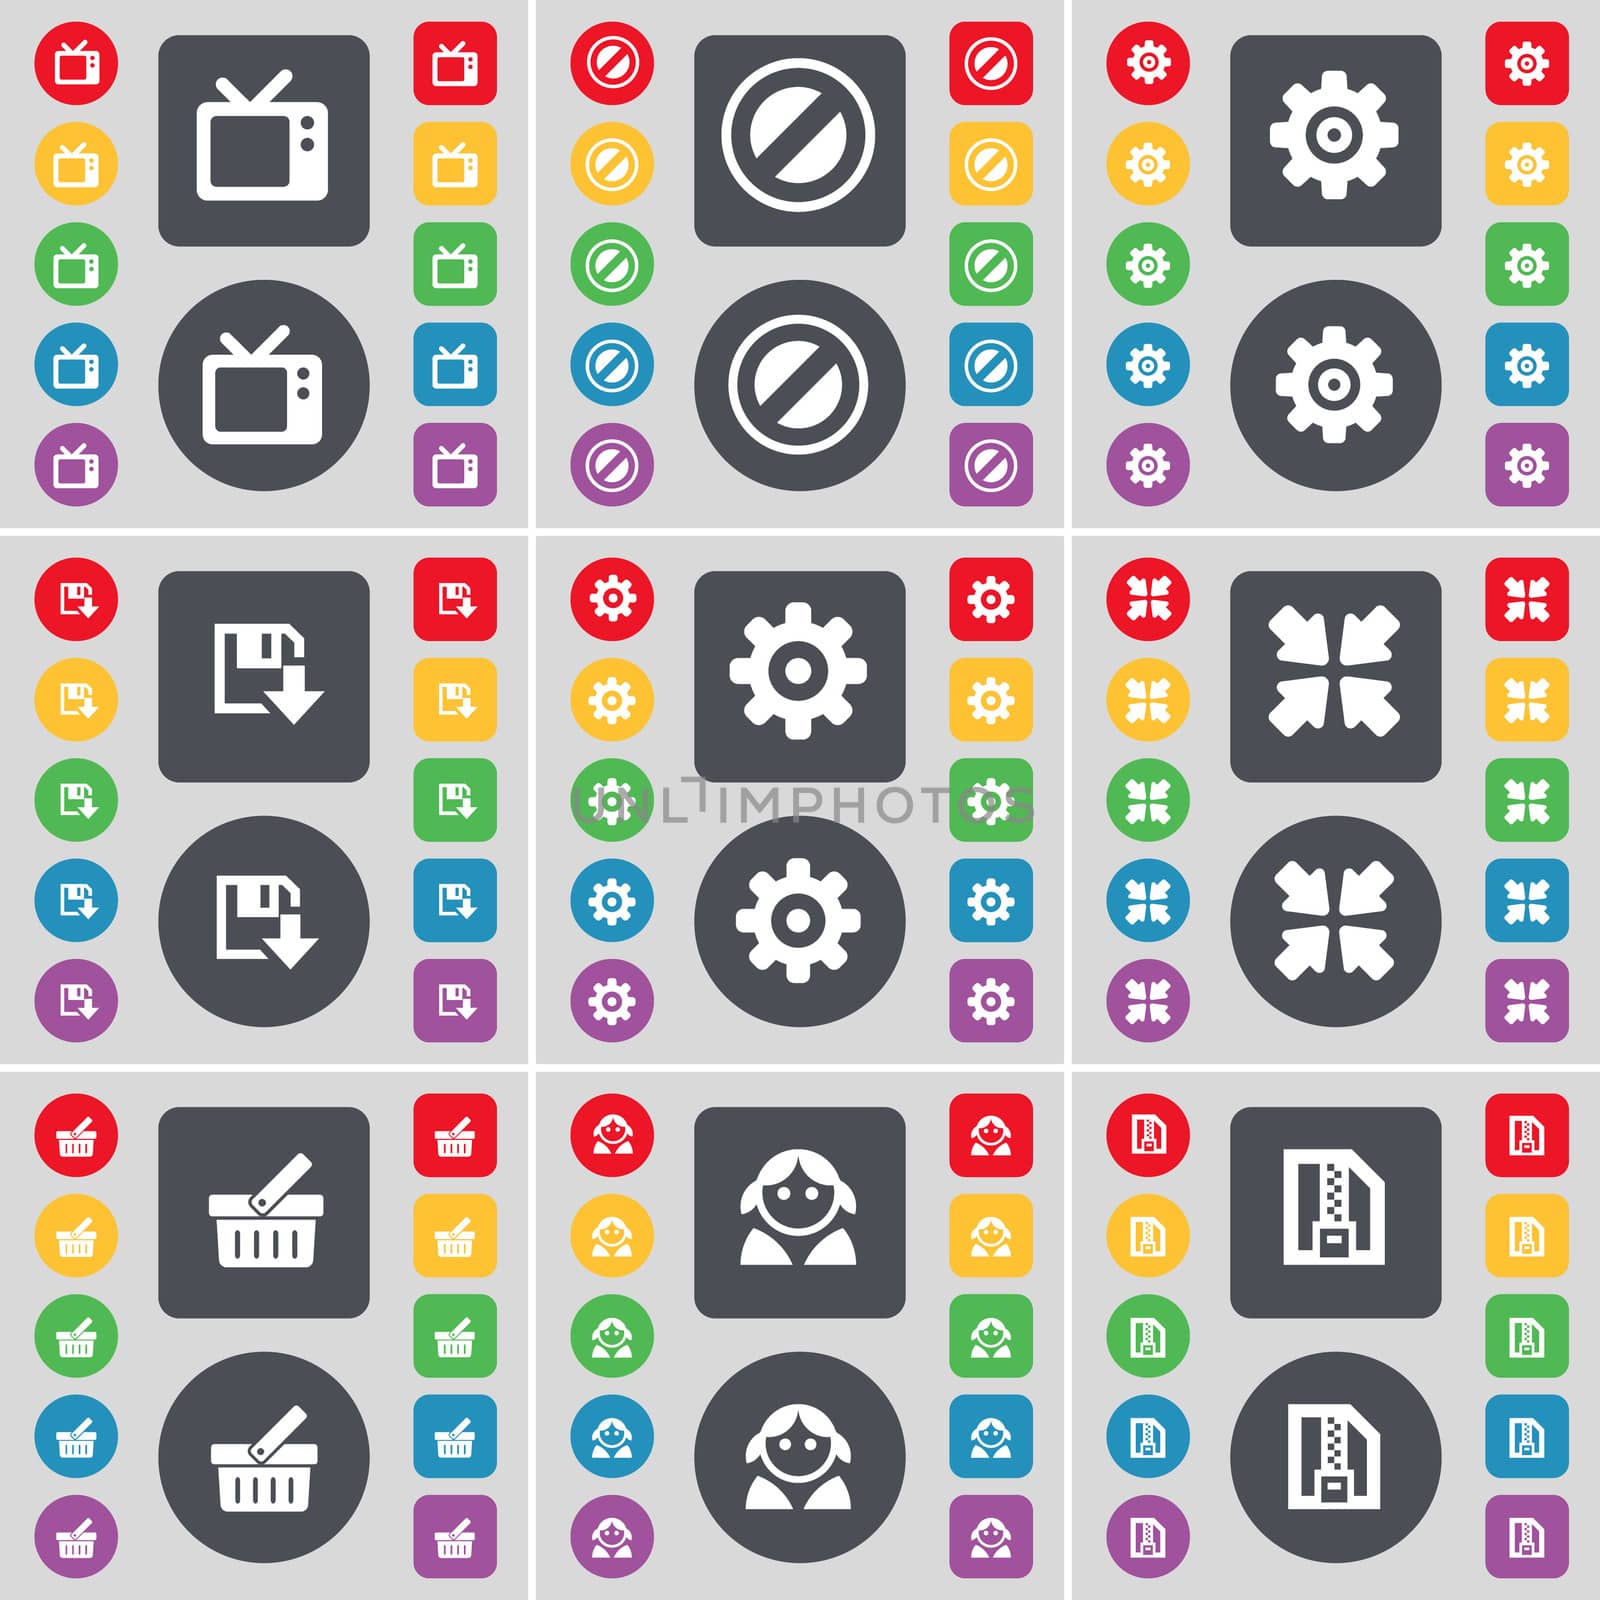 Retro TV, Stop, Gear, Floppy, Deploying screen, Basket, Avatar, ZIP file icon symbol. A large set of flat, colored buttons for your design. illustration